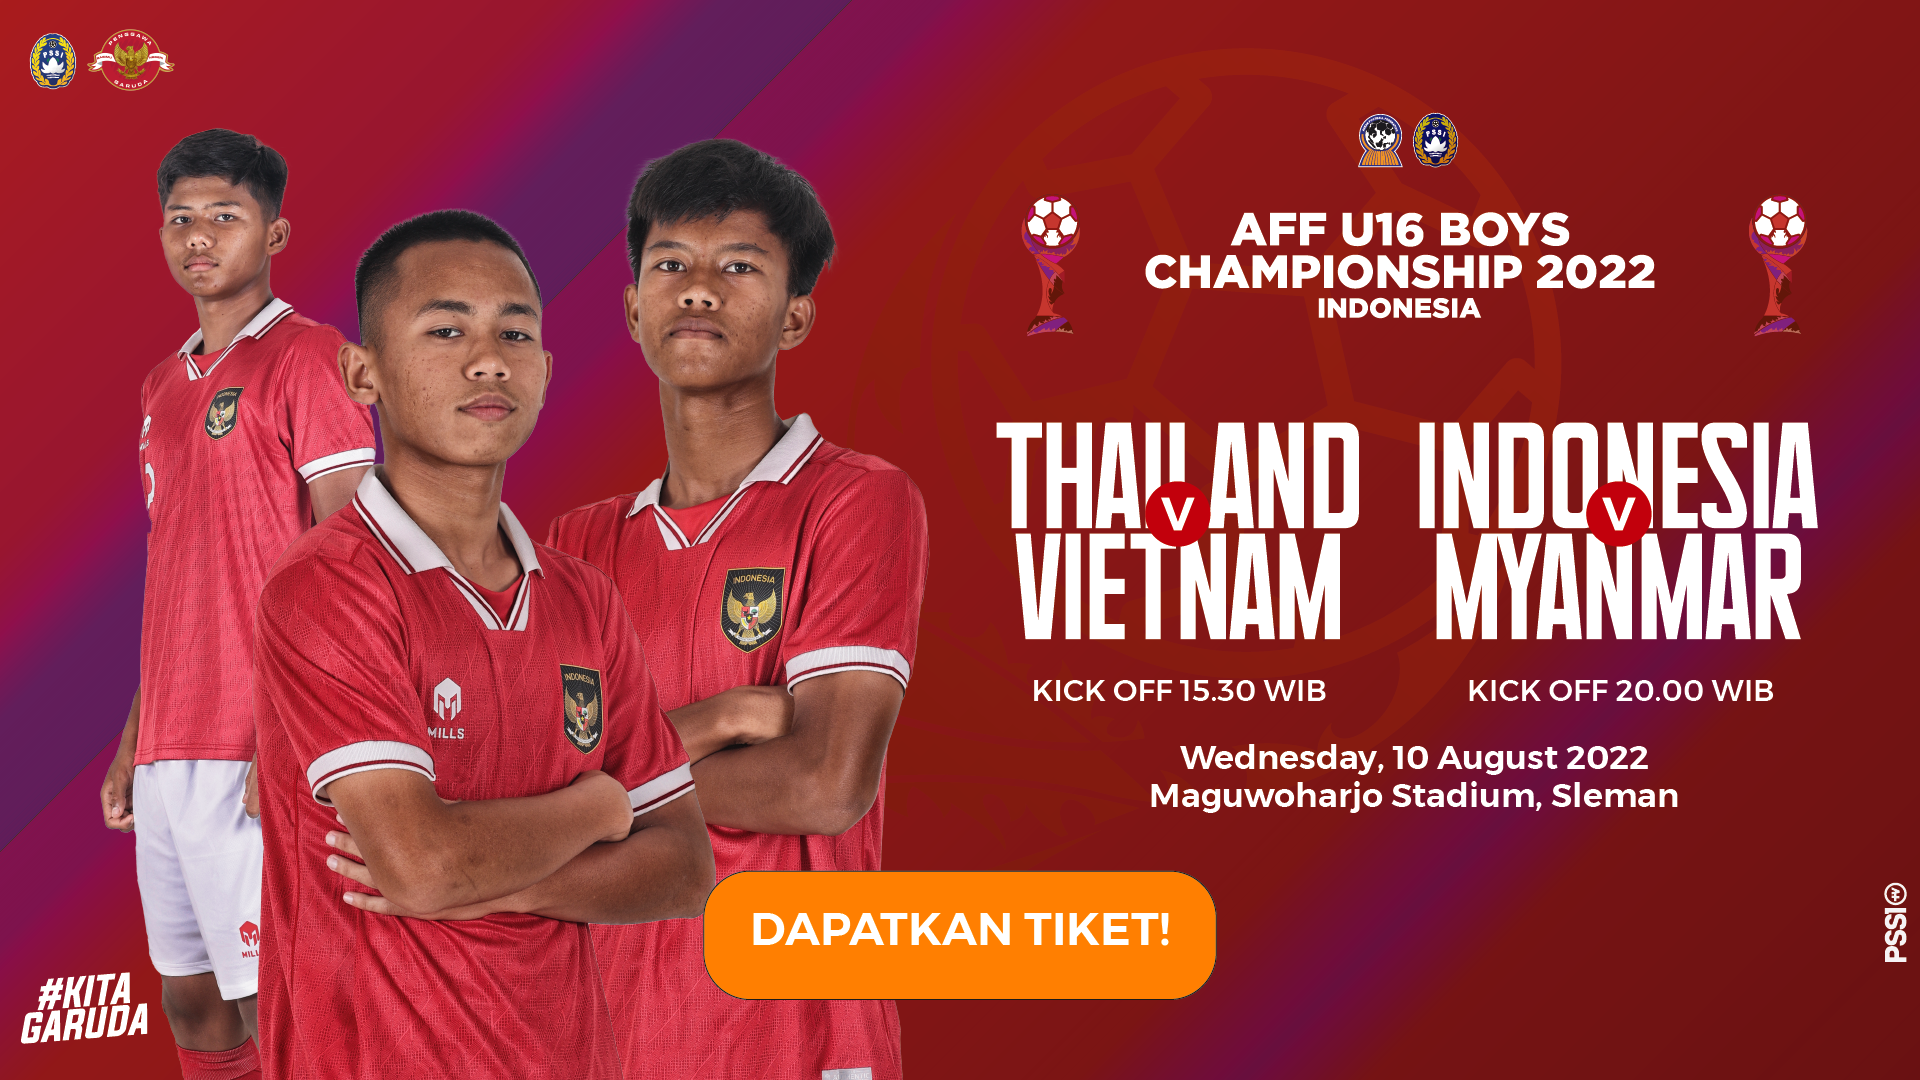 The Indonesian National Team Qualifies for the Semifinals of the AFF Cup 2022, as Runner-up